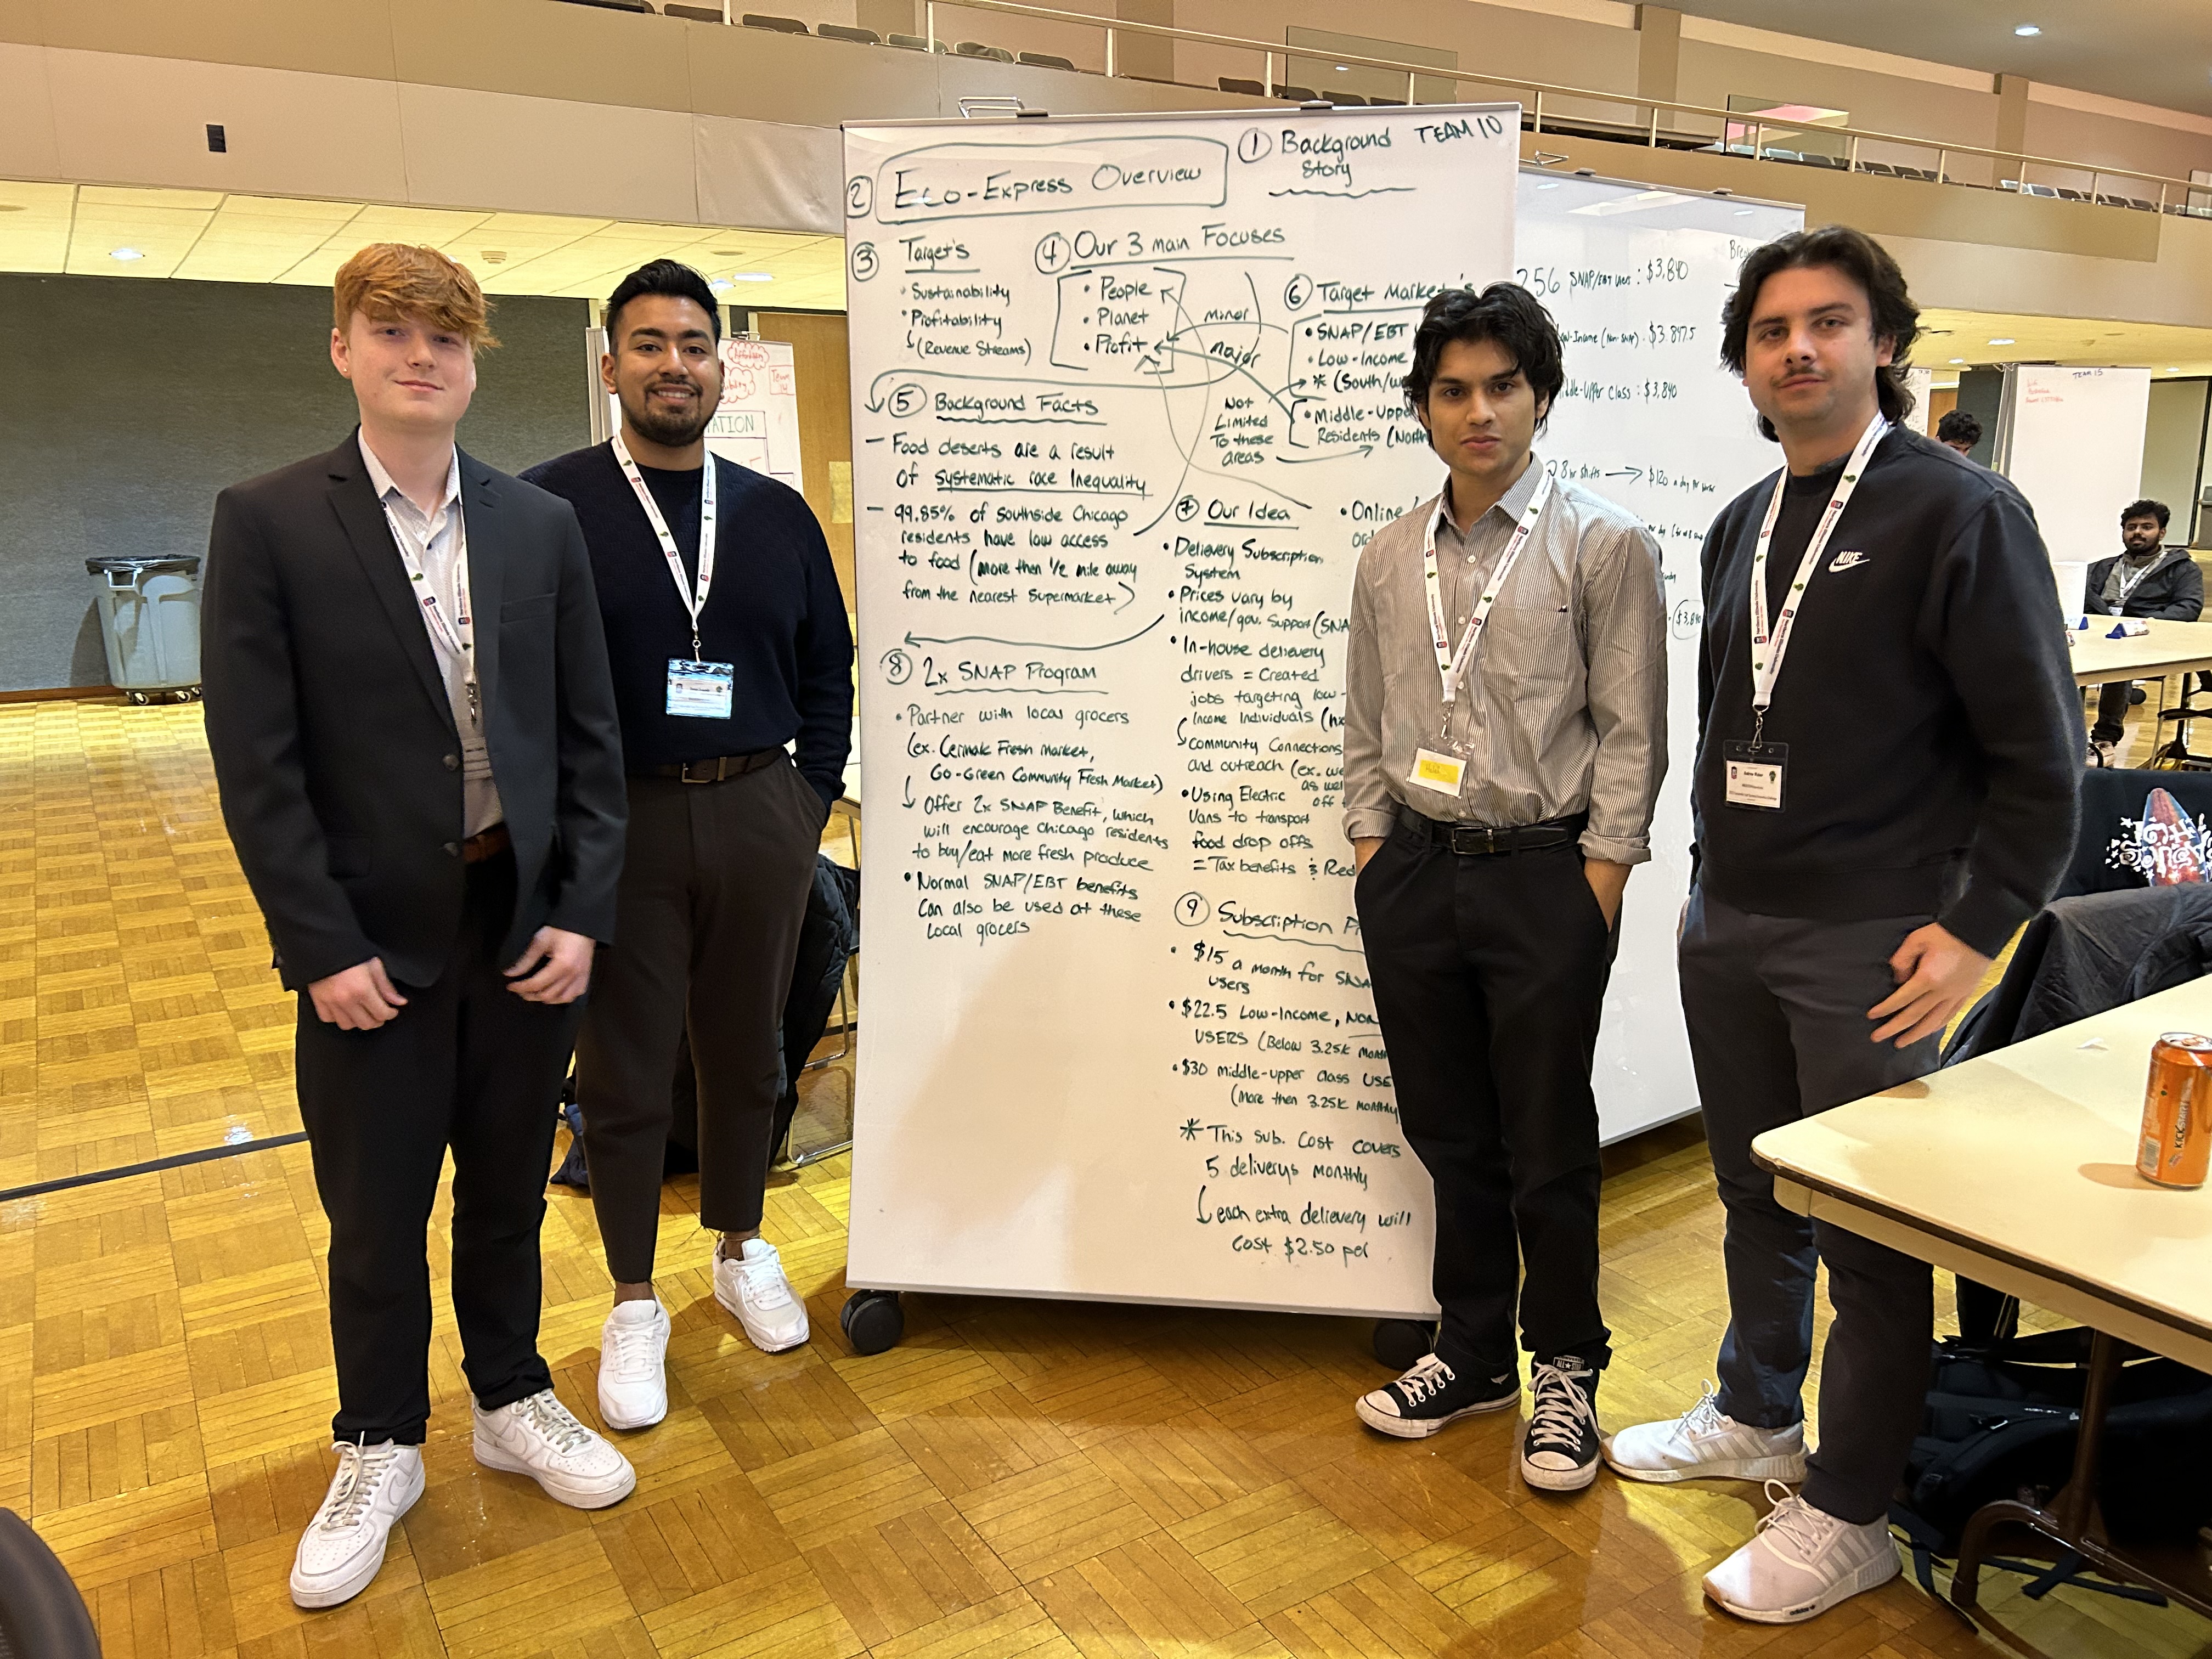 Four students pose in front of a handwritten flowchart for their food delivery service, eco-express